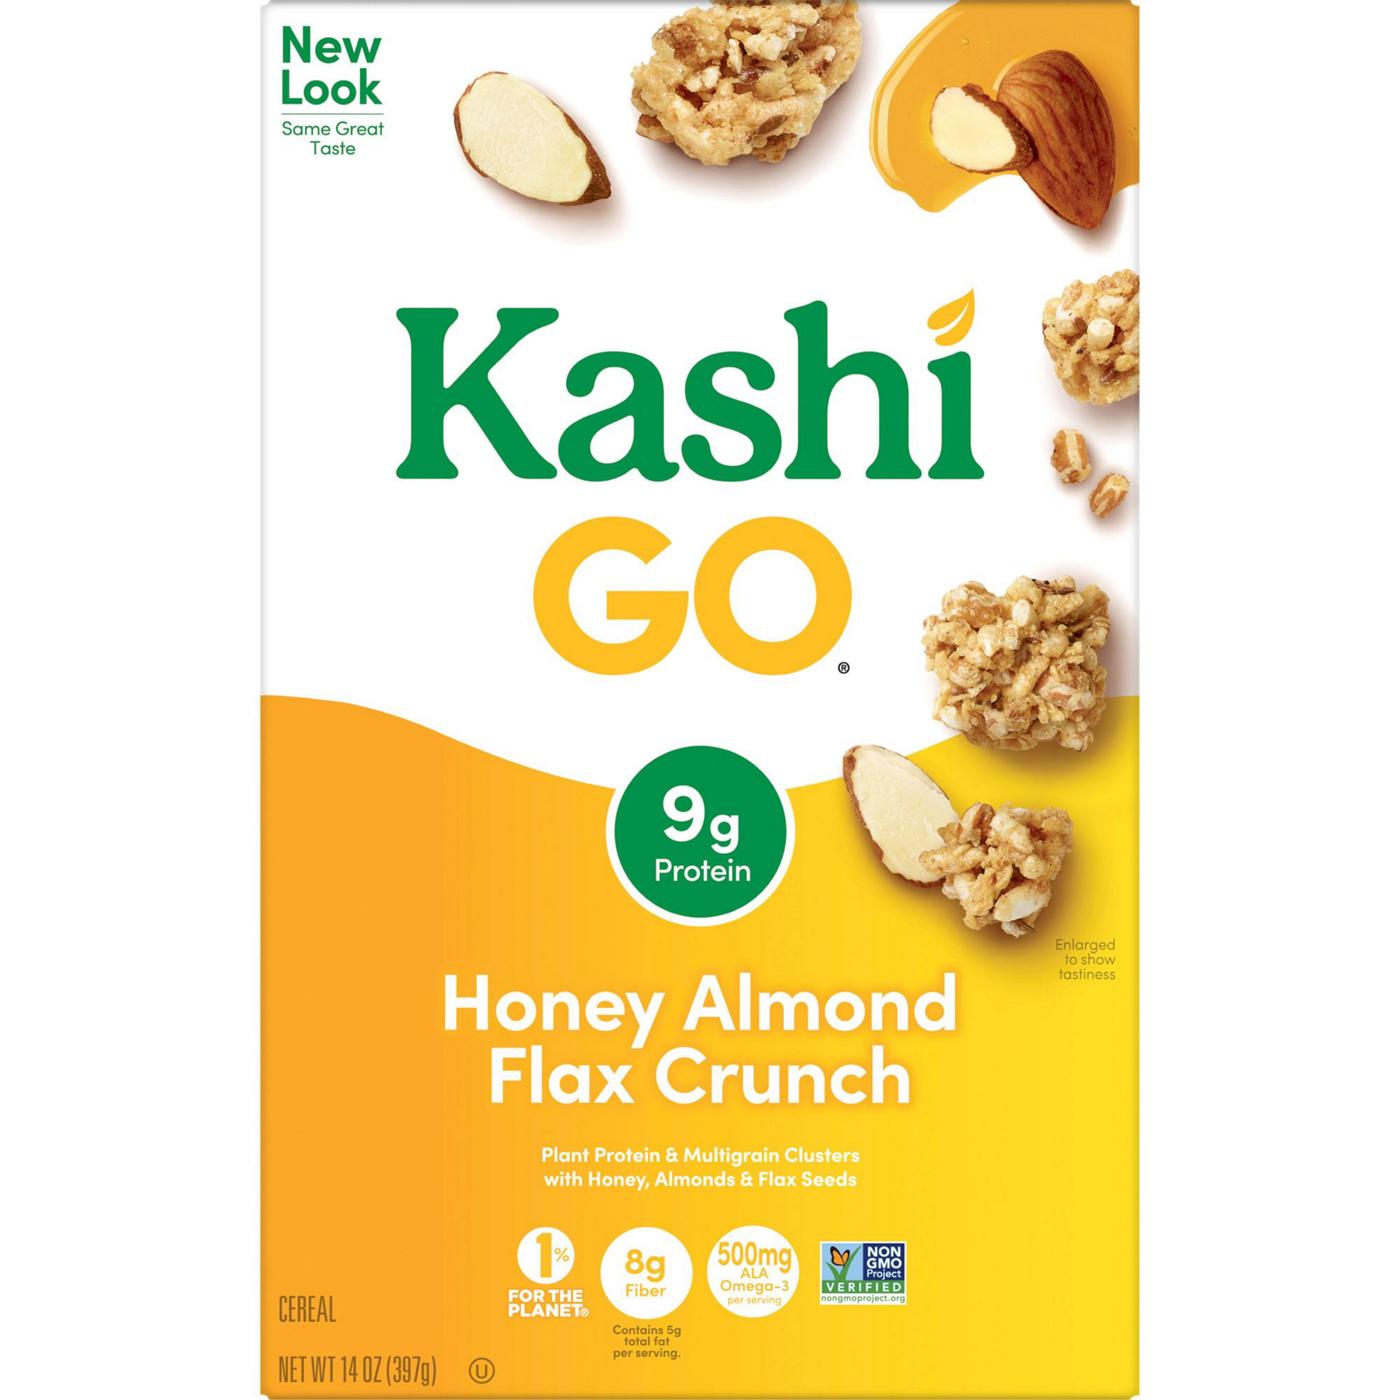 Kashi GO Honey Almond Flax Crunch Breakfast Cereal; image 1 of 11